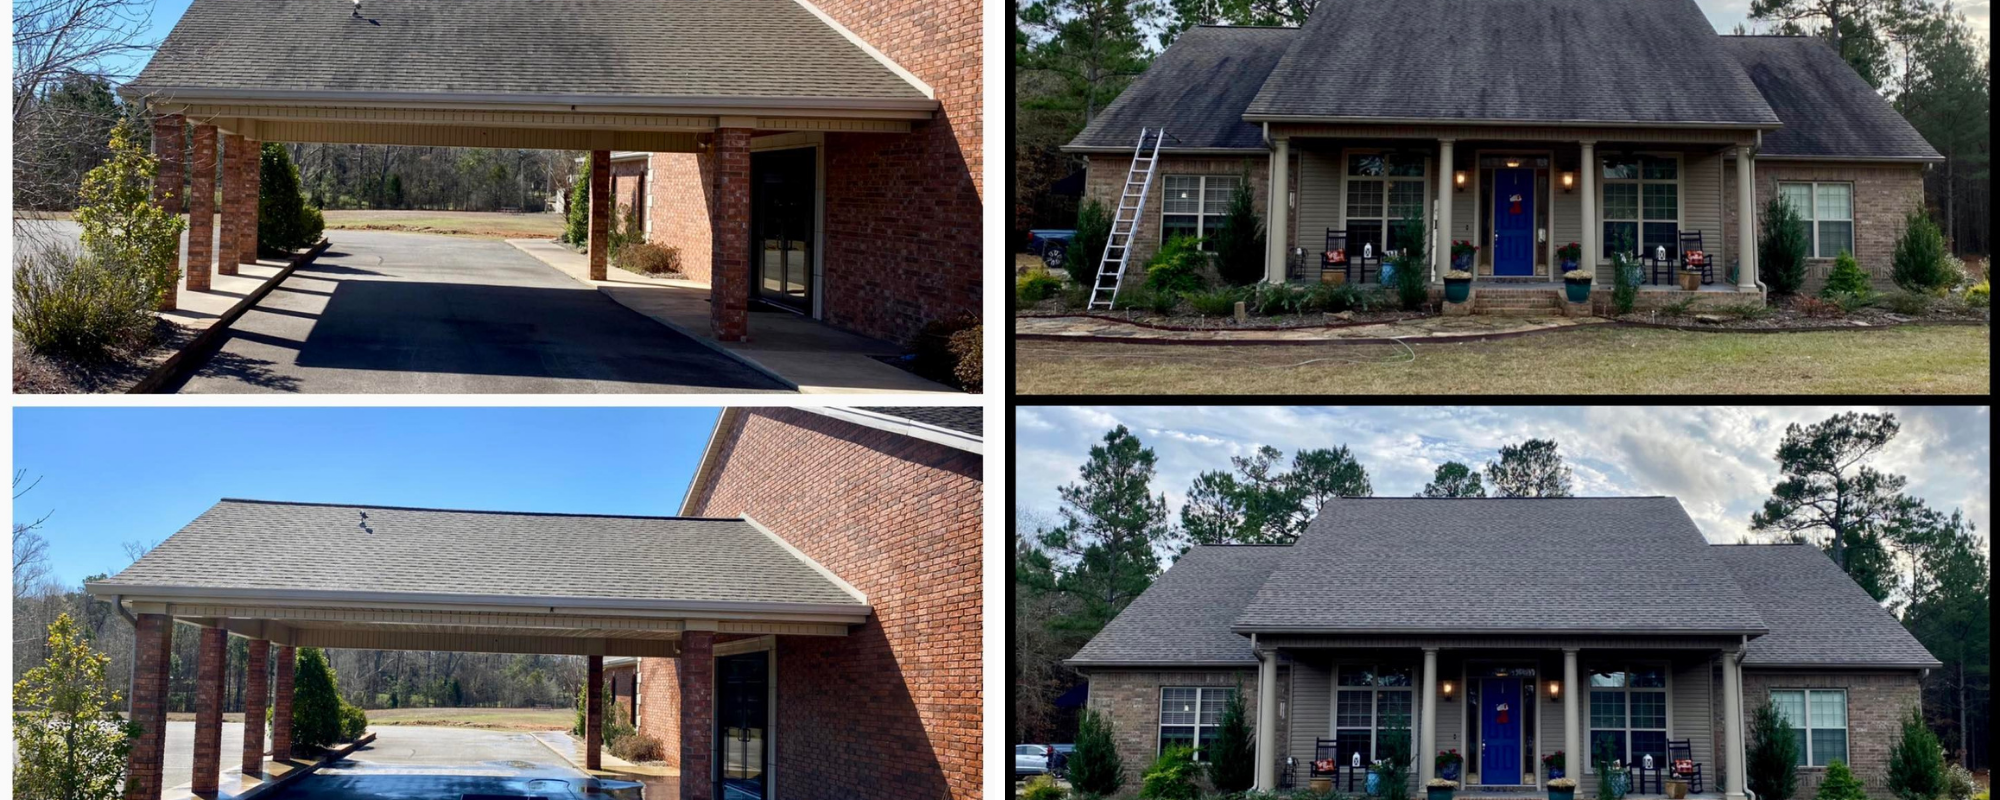 Roof Washing Services in Bryant AR